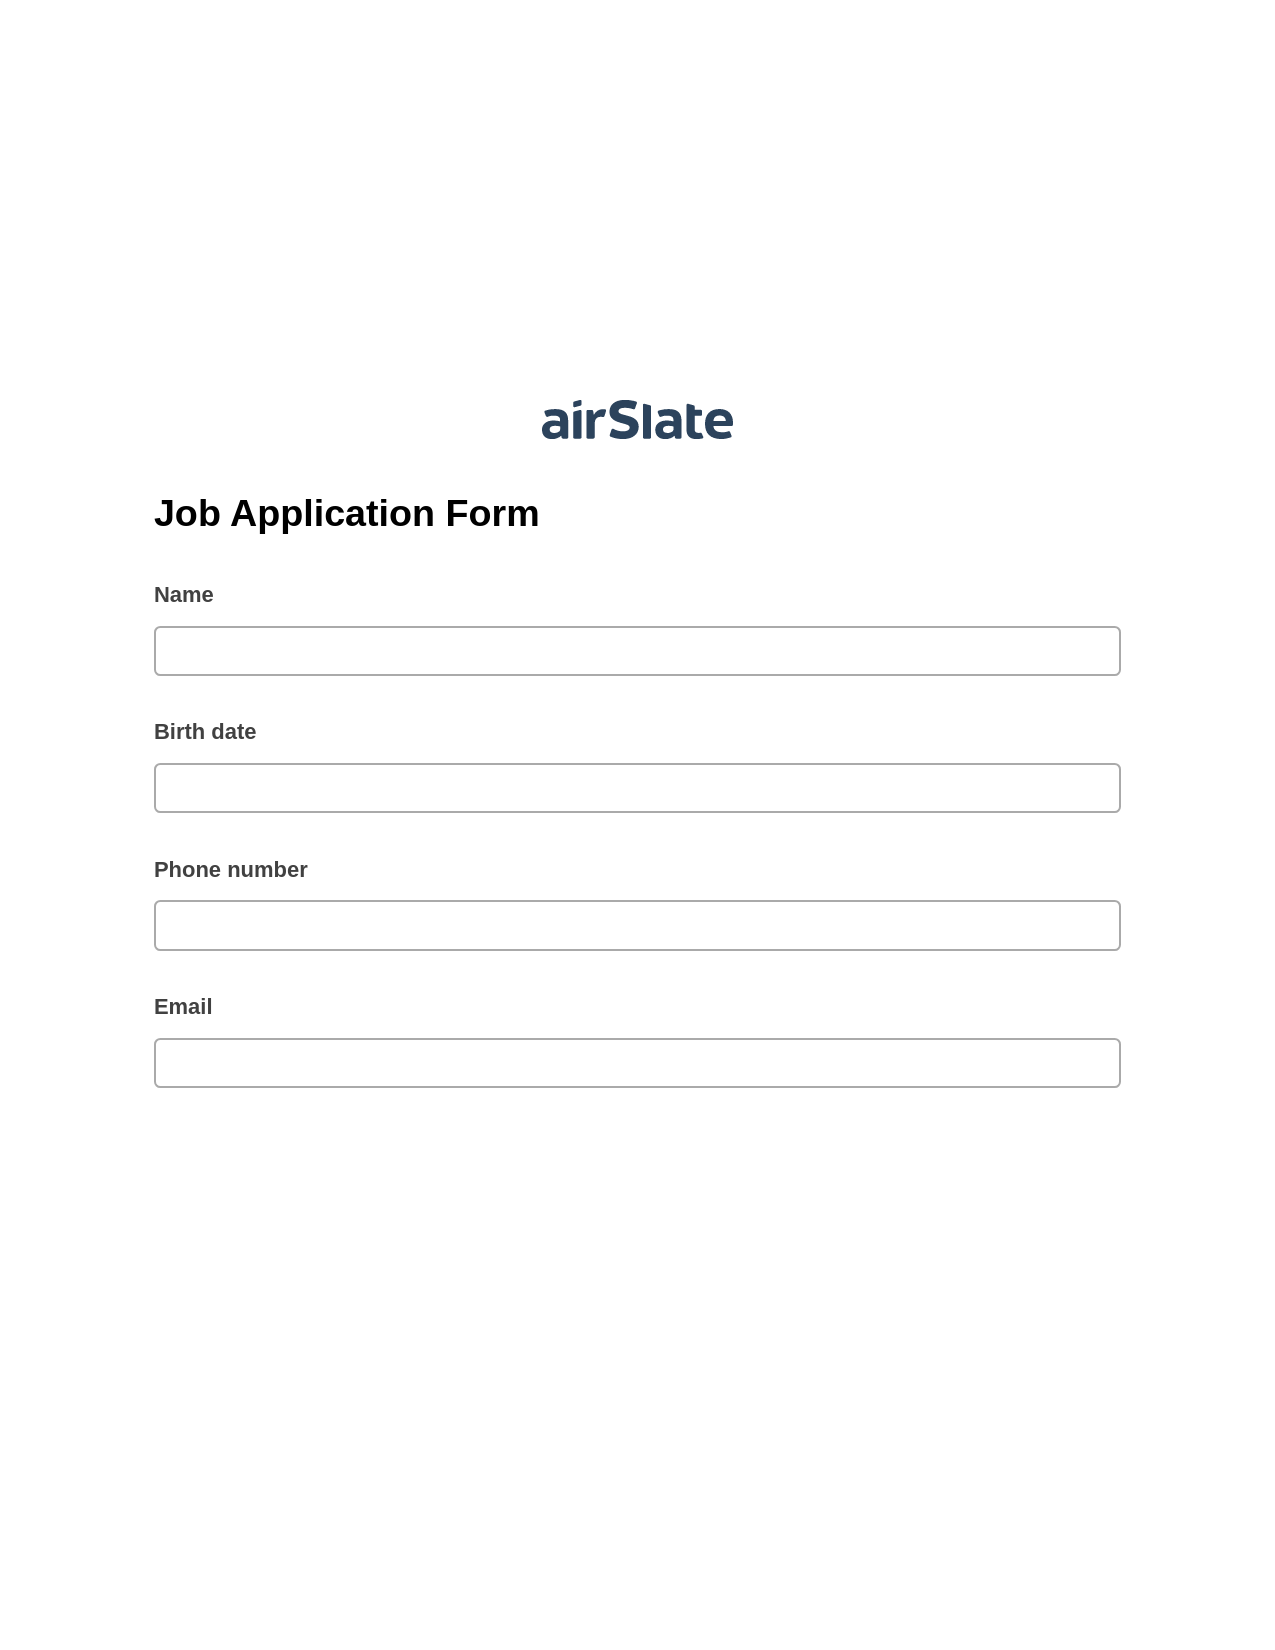 Multirole Job Application Form Pre-fill from Excel Spreadsheet Bot, Create MS Dynamics 365 Records Bot, Post-finish Document Bot